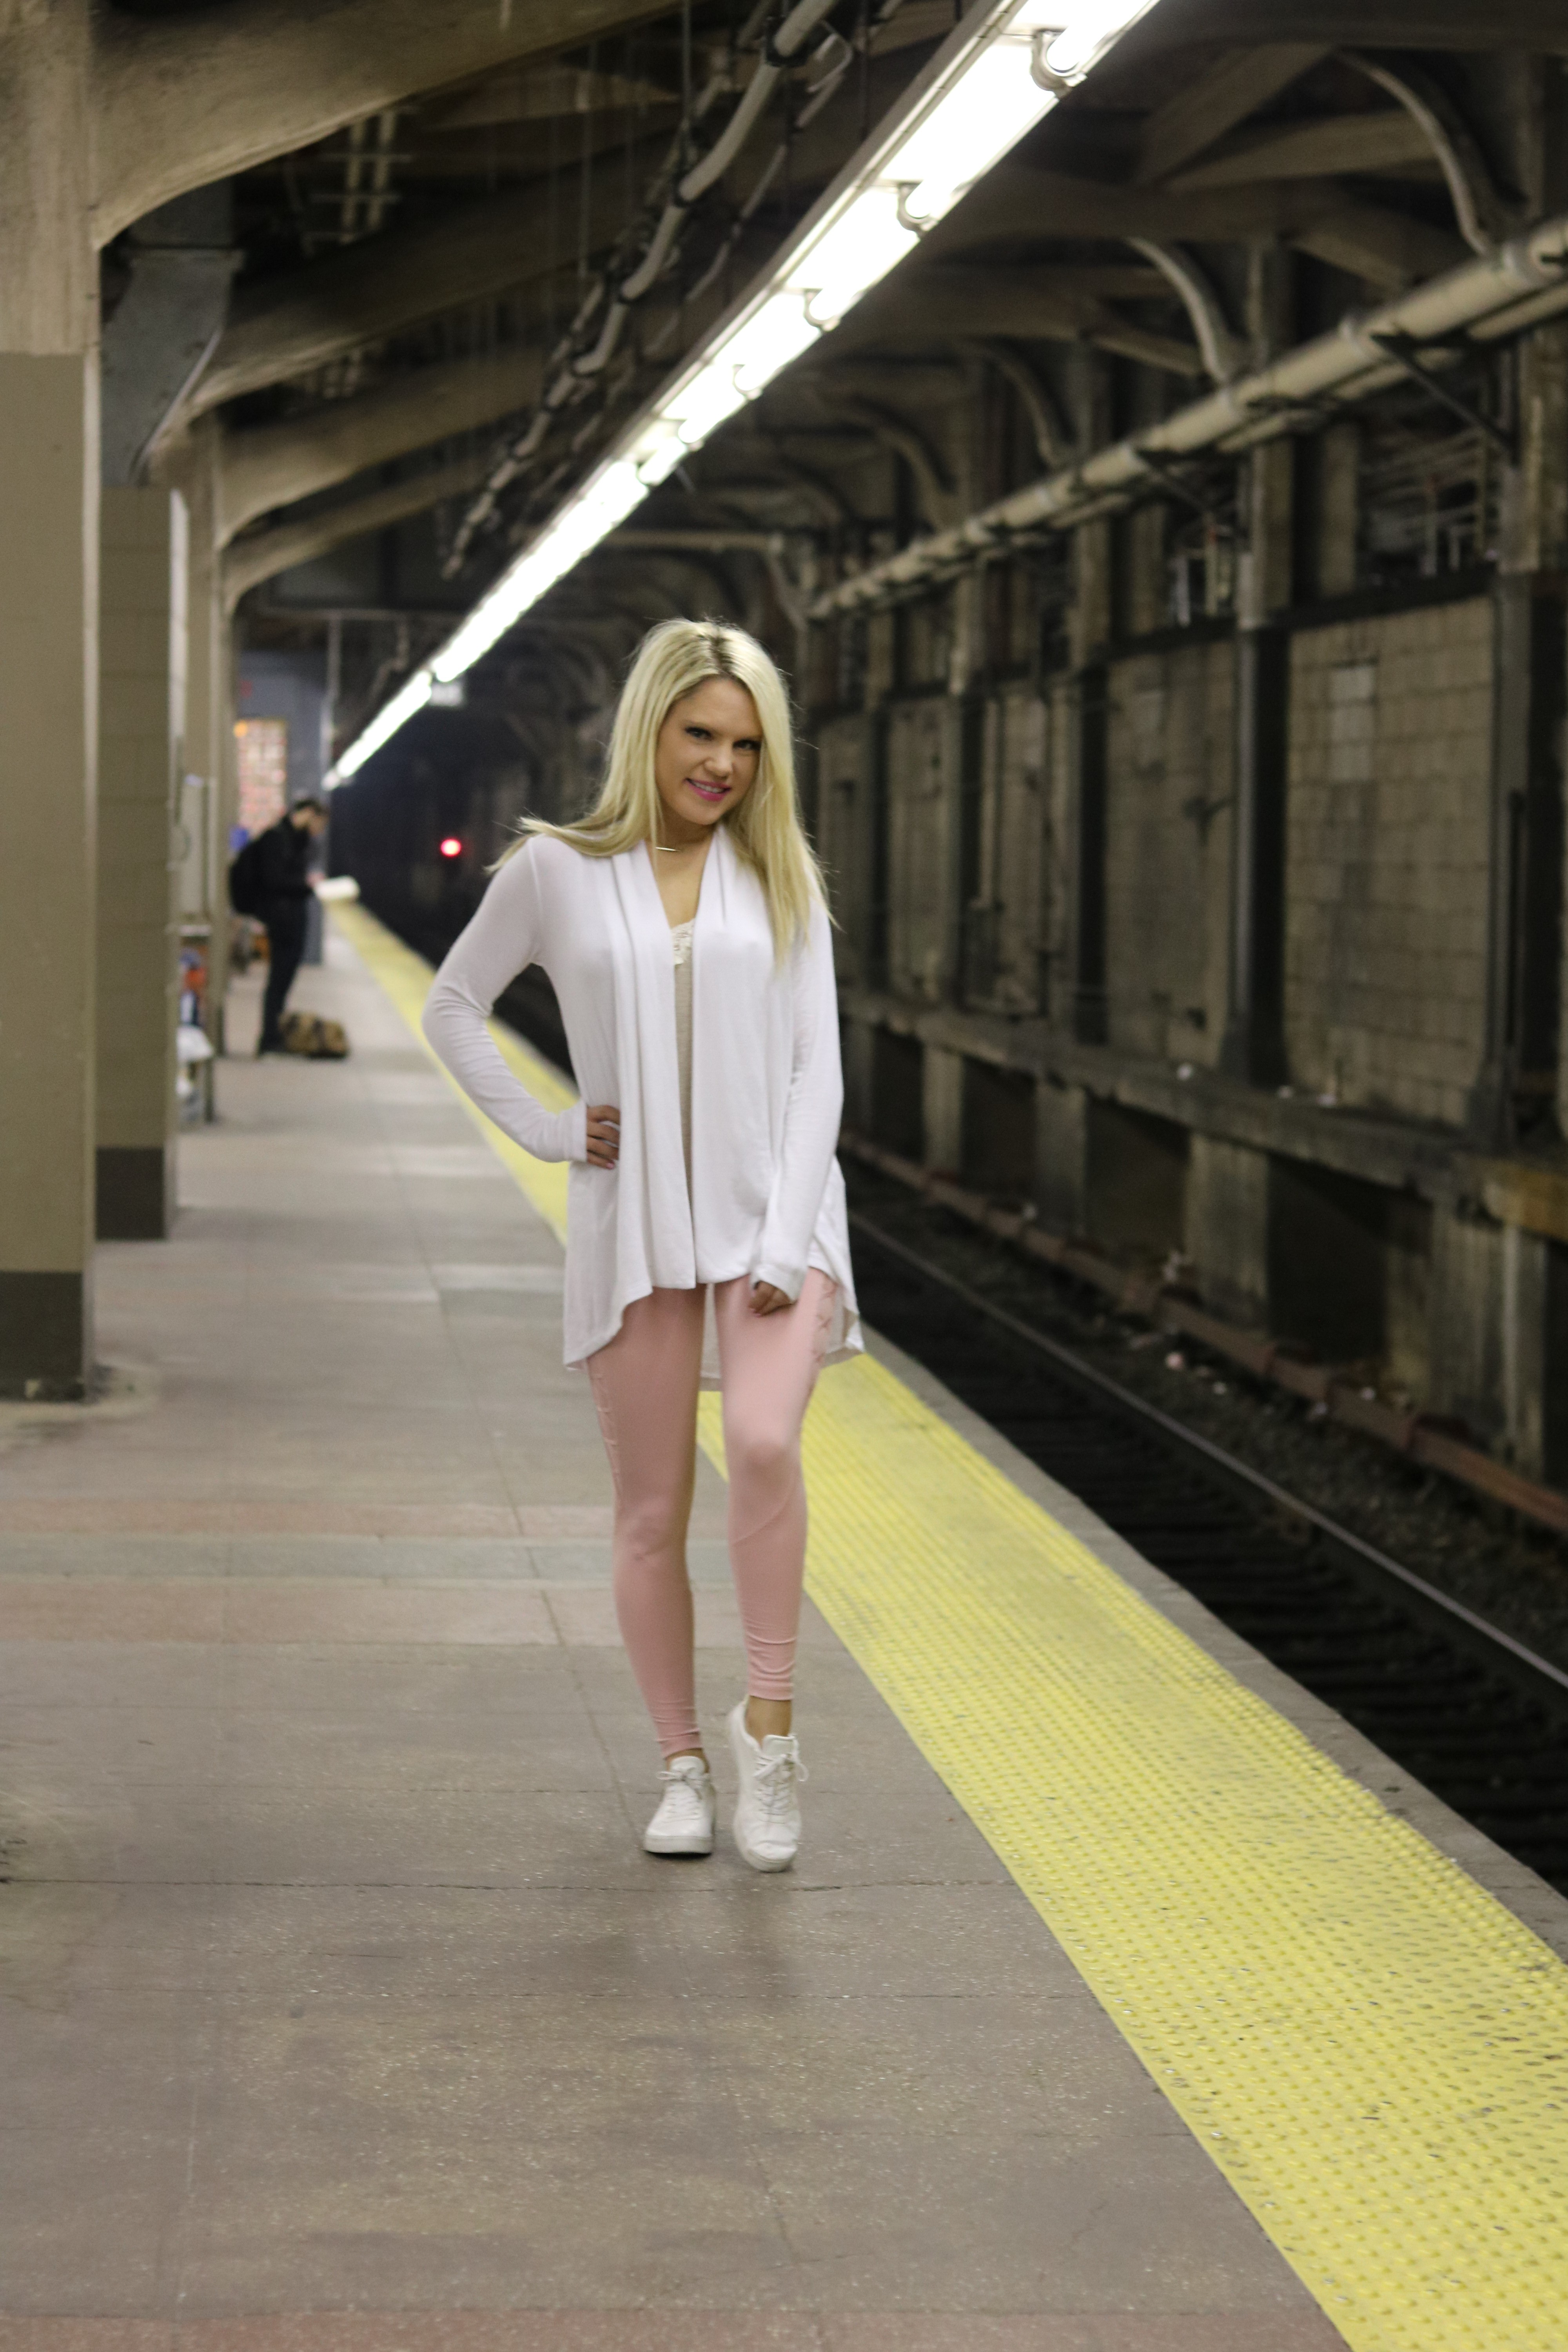 workout style in NYC subway